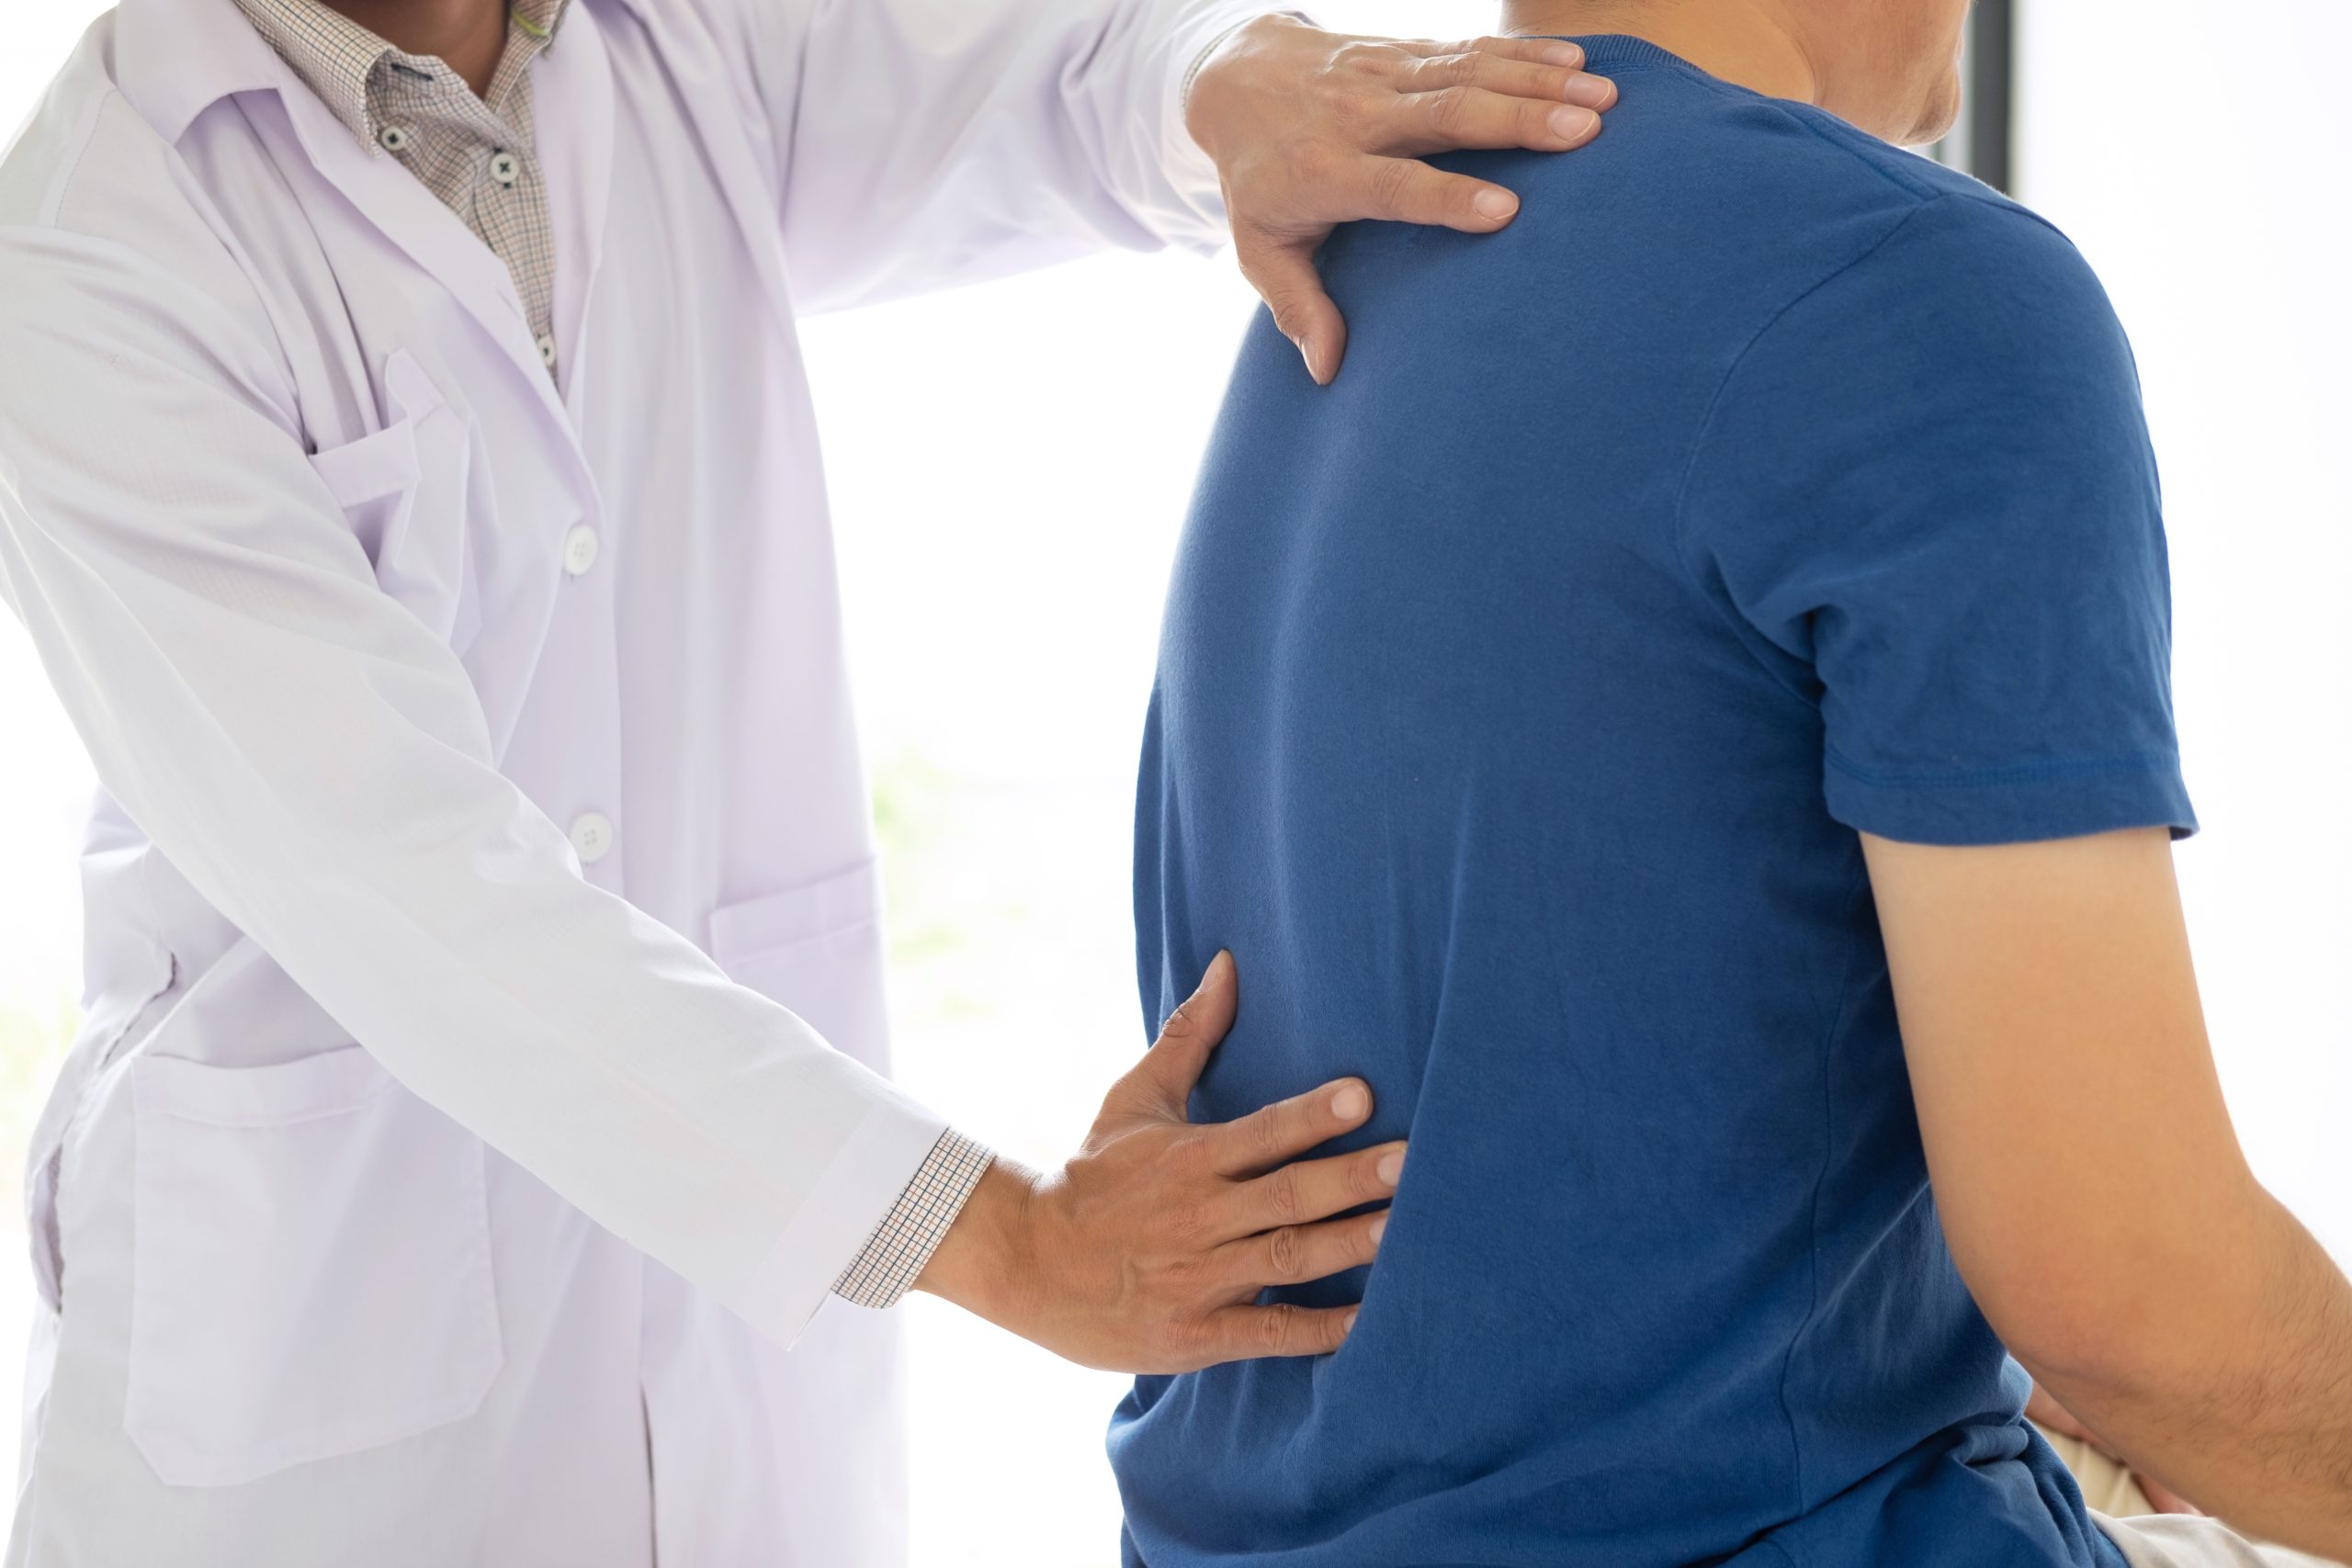 What is a Physiatrist? What Do They Do for Low Back Pain?